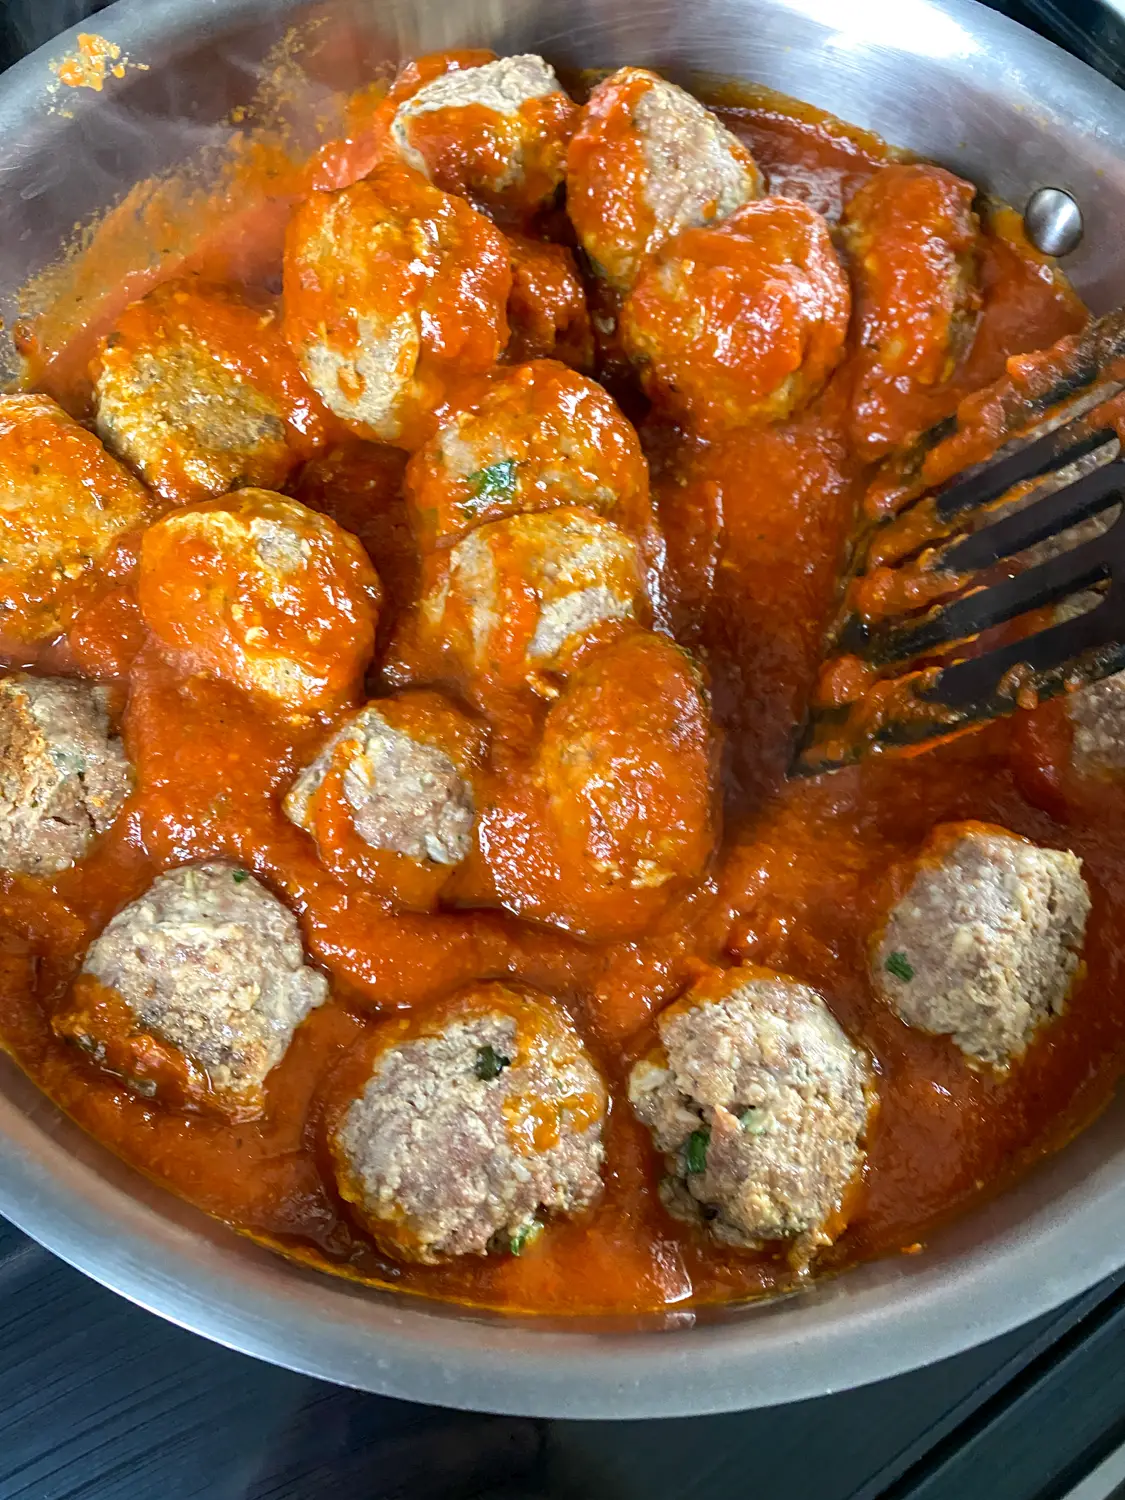 As the marinara sauce is heated, carefully turn the meatballs to coat in the sauce.